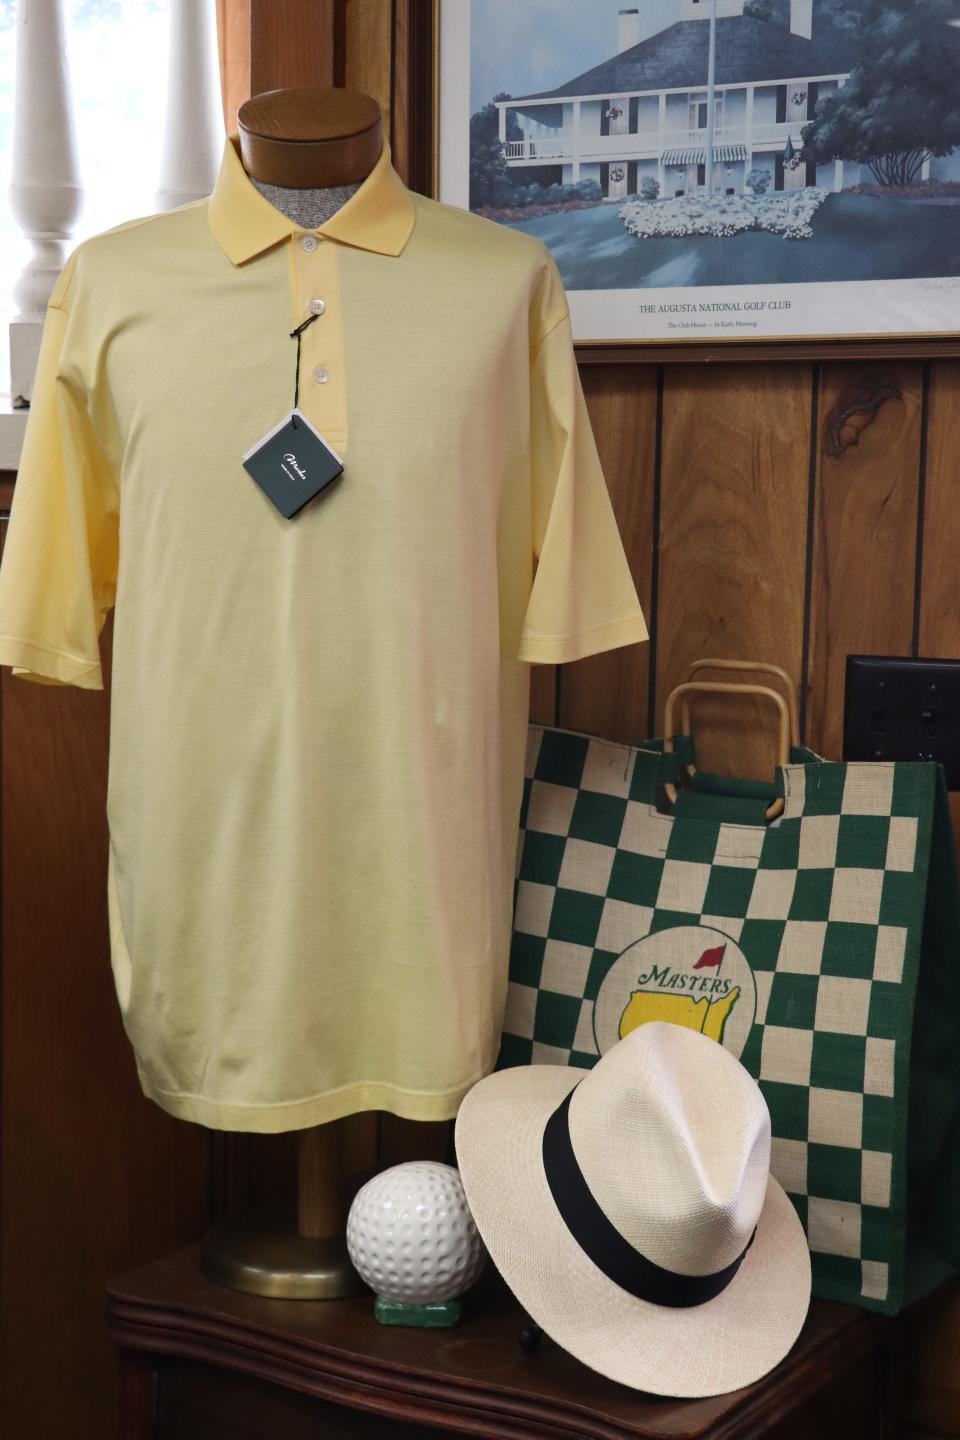 Gentry Men's Shop offers a number of Masters-appropriate clothing options for patrons.